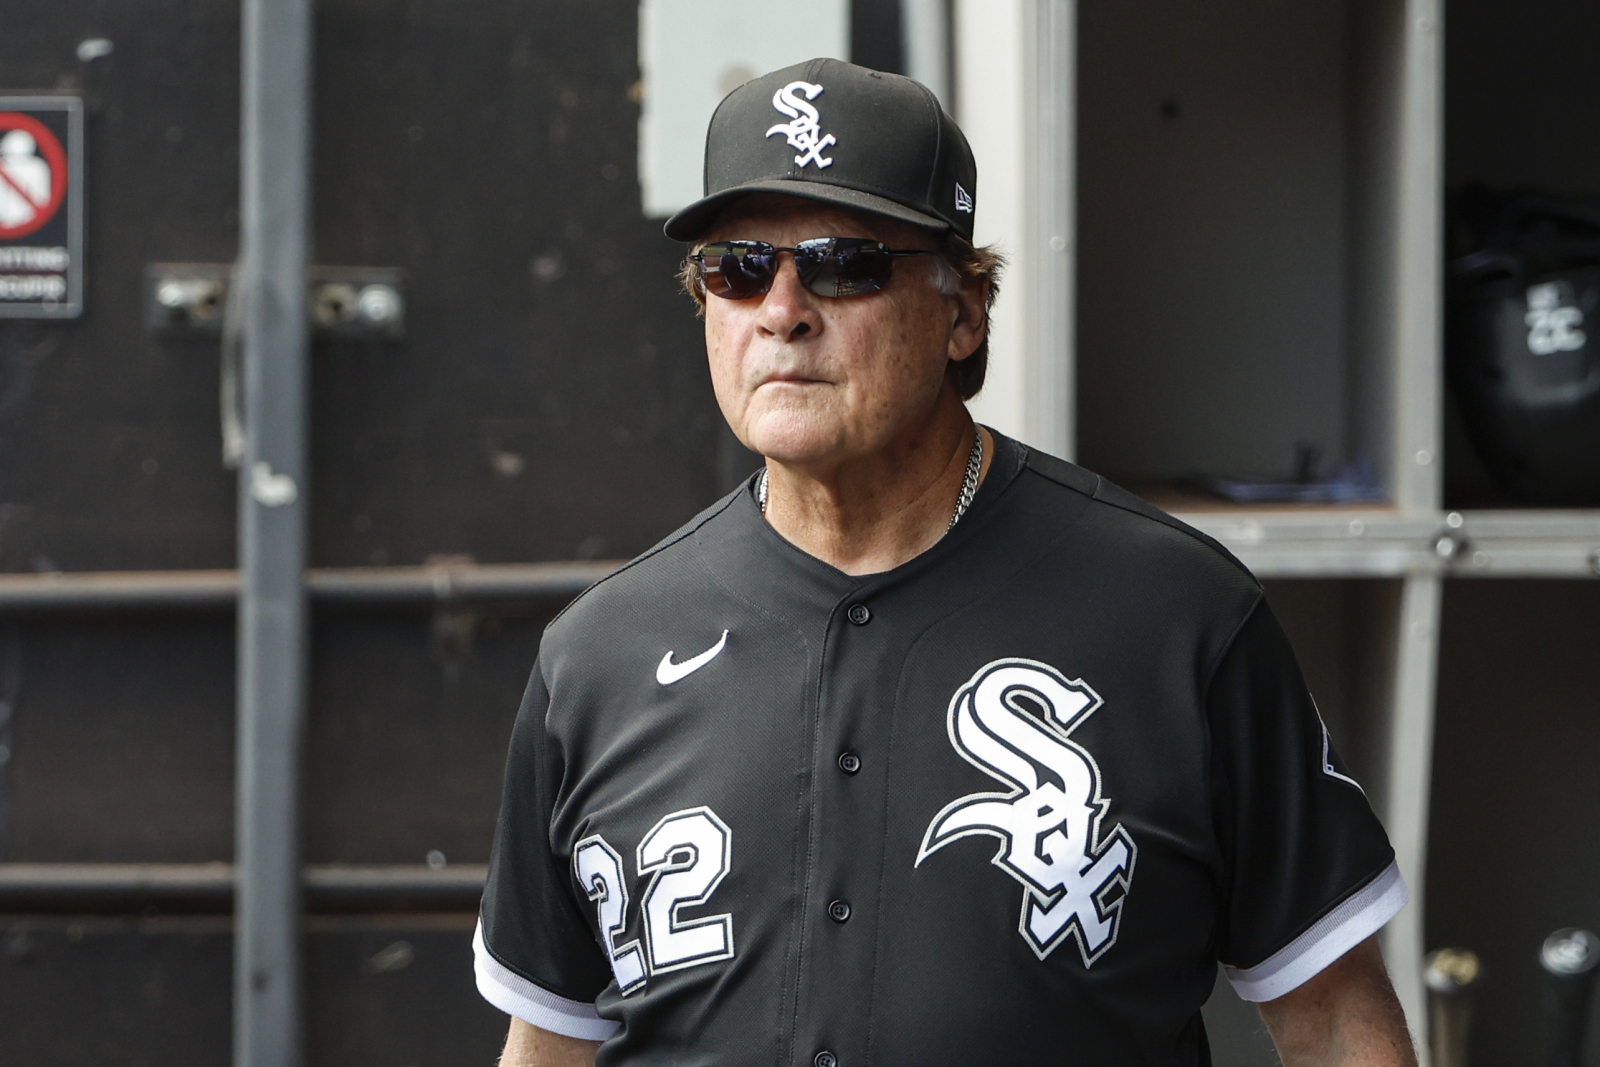 Tony La Russa steps down as White Sox manager, cites health issues